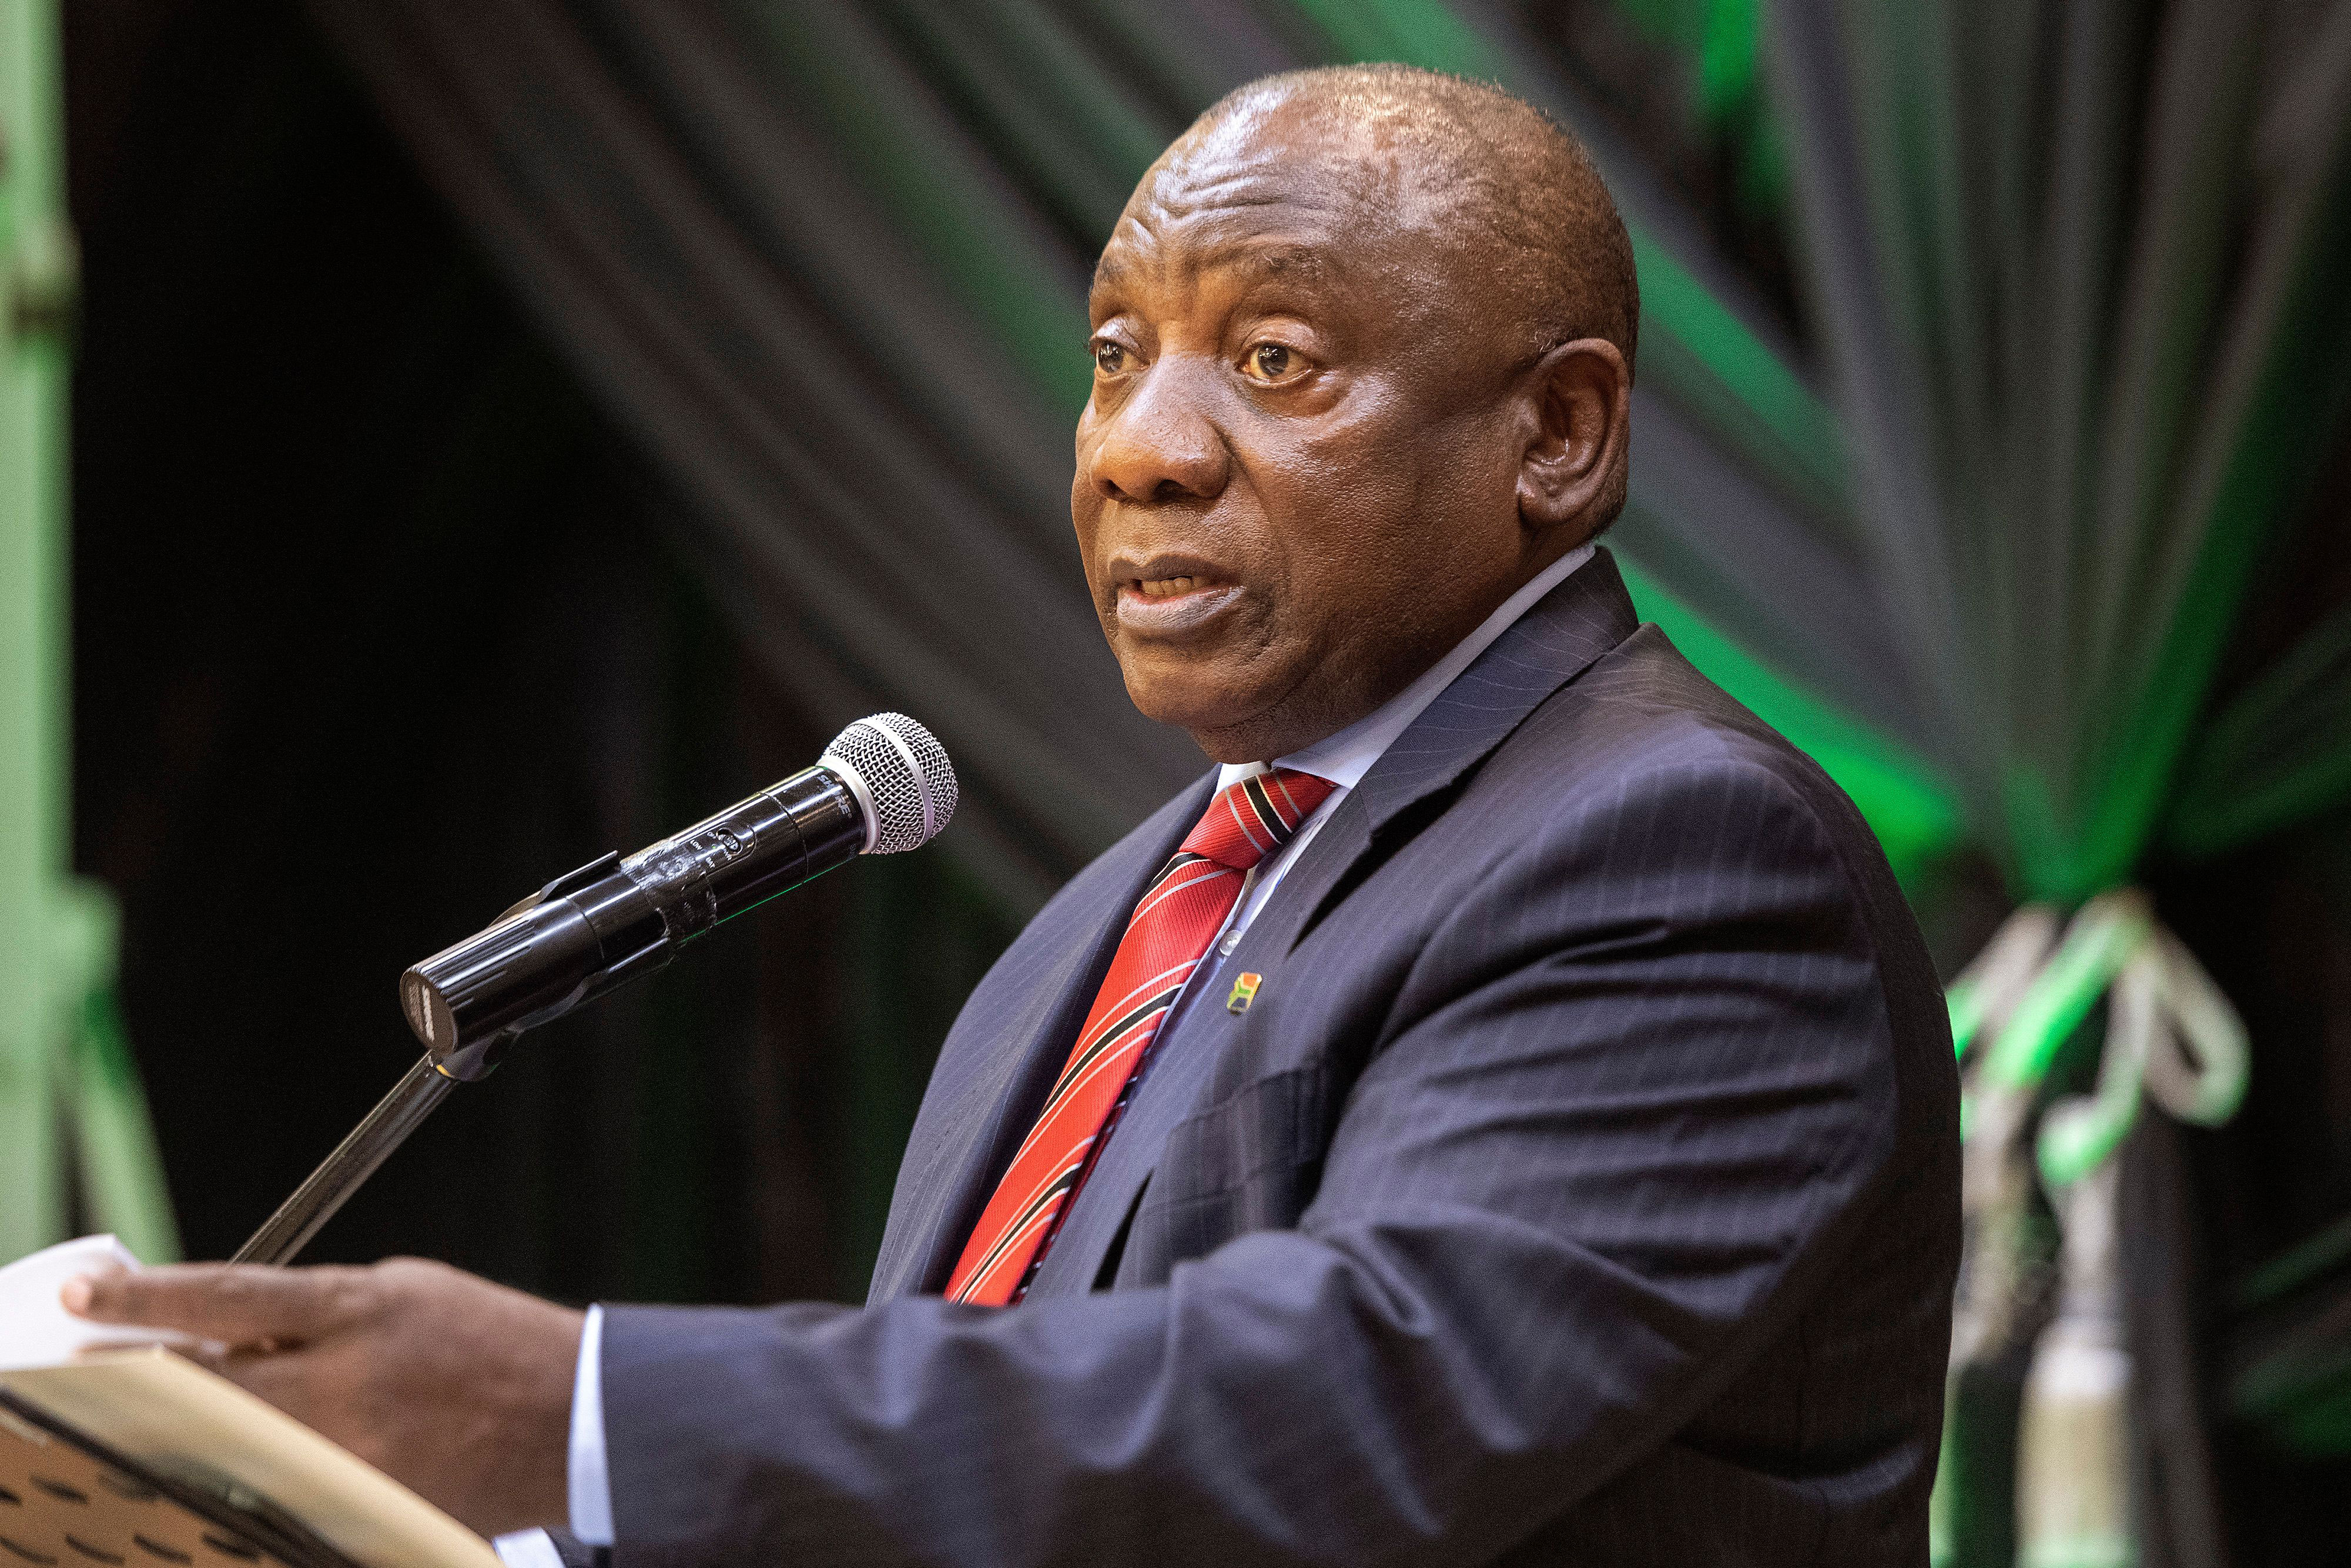 South African President Cyril Ramaphosa speaks in Cape Town, South Africa, on May 6.